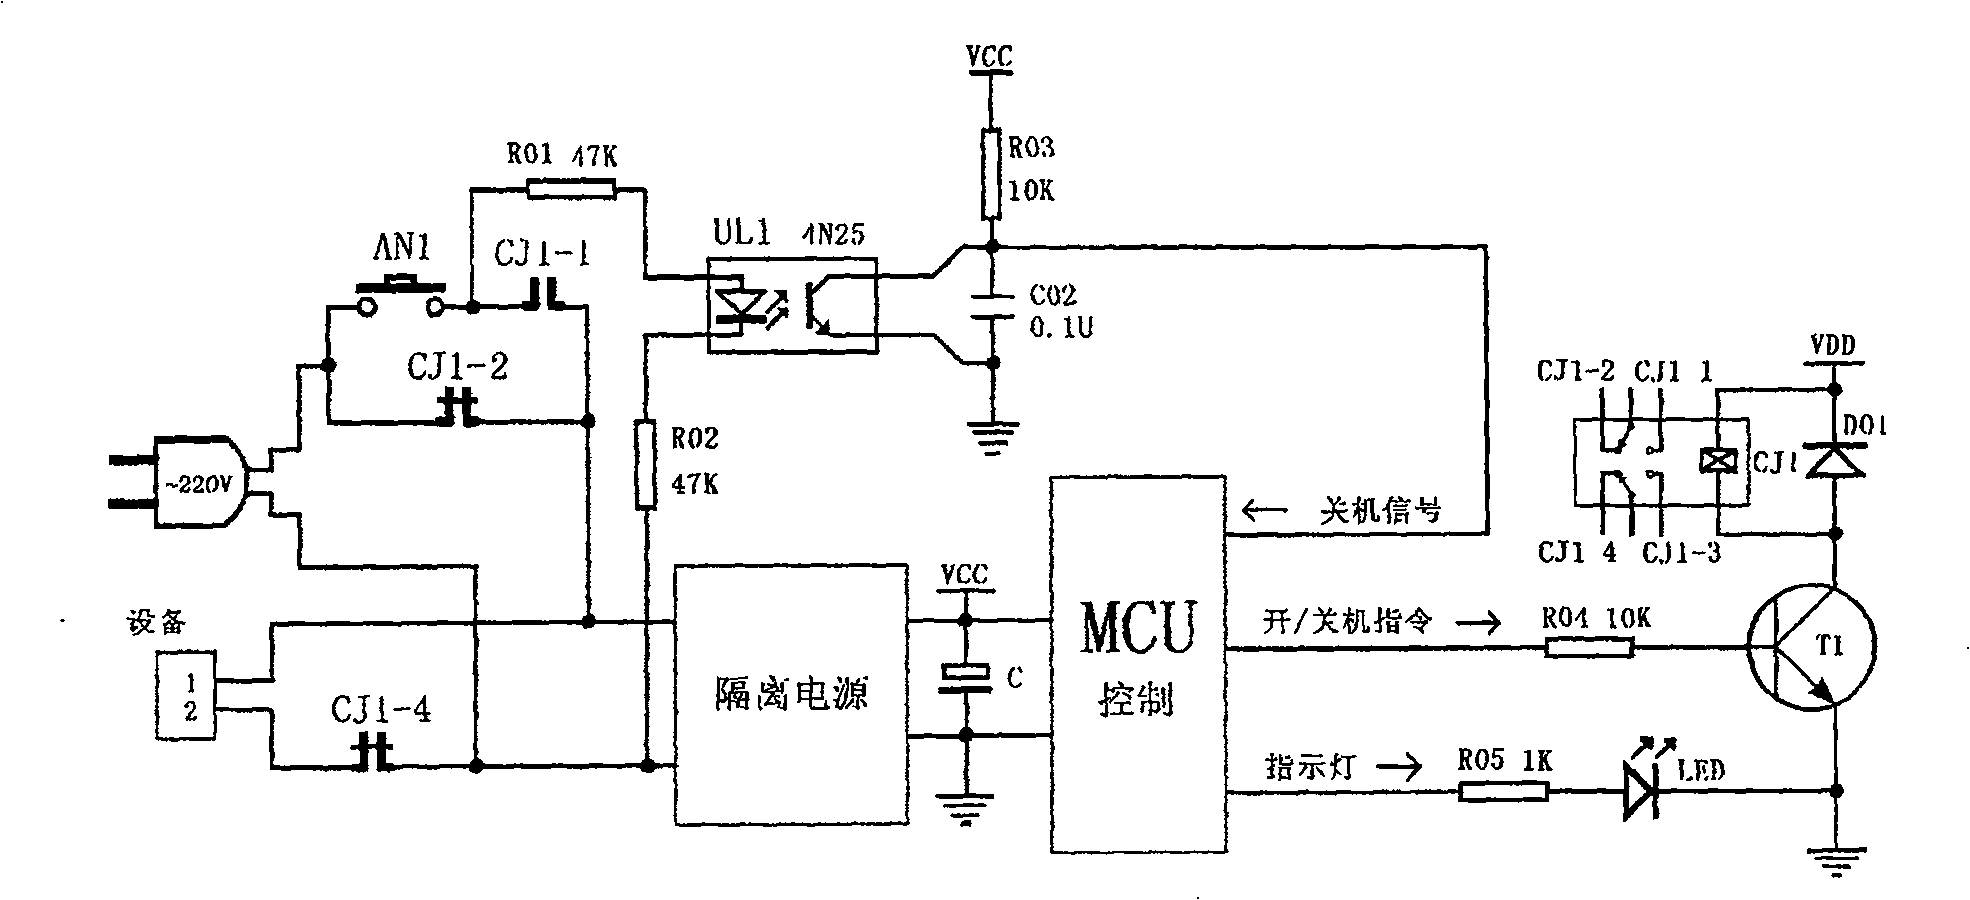 Standby free programmable power supply on-off circuit with single push button